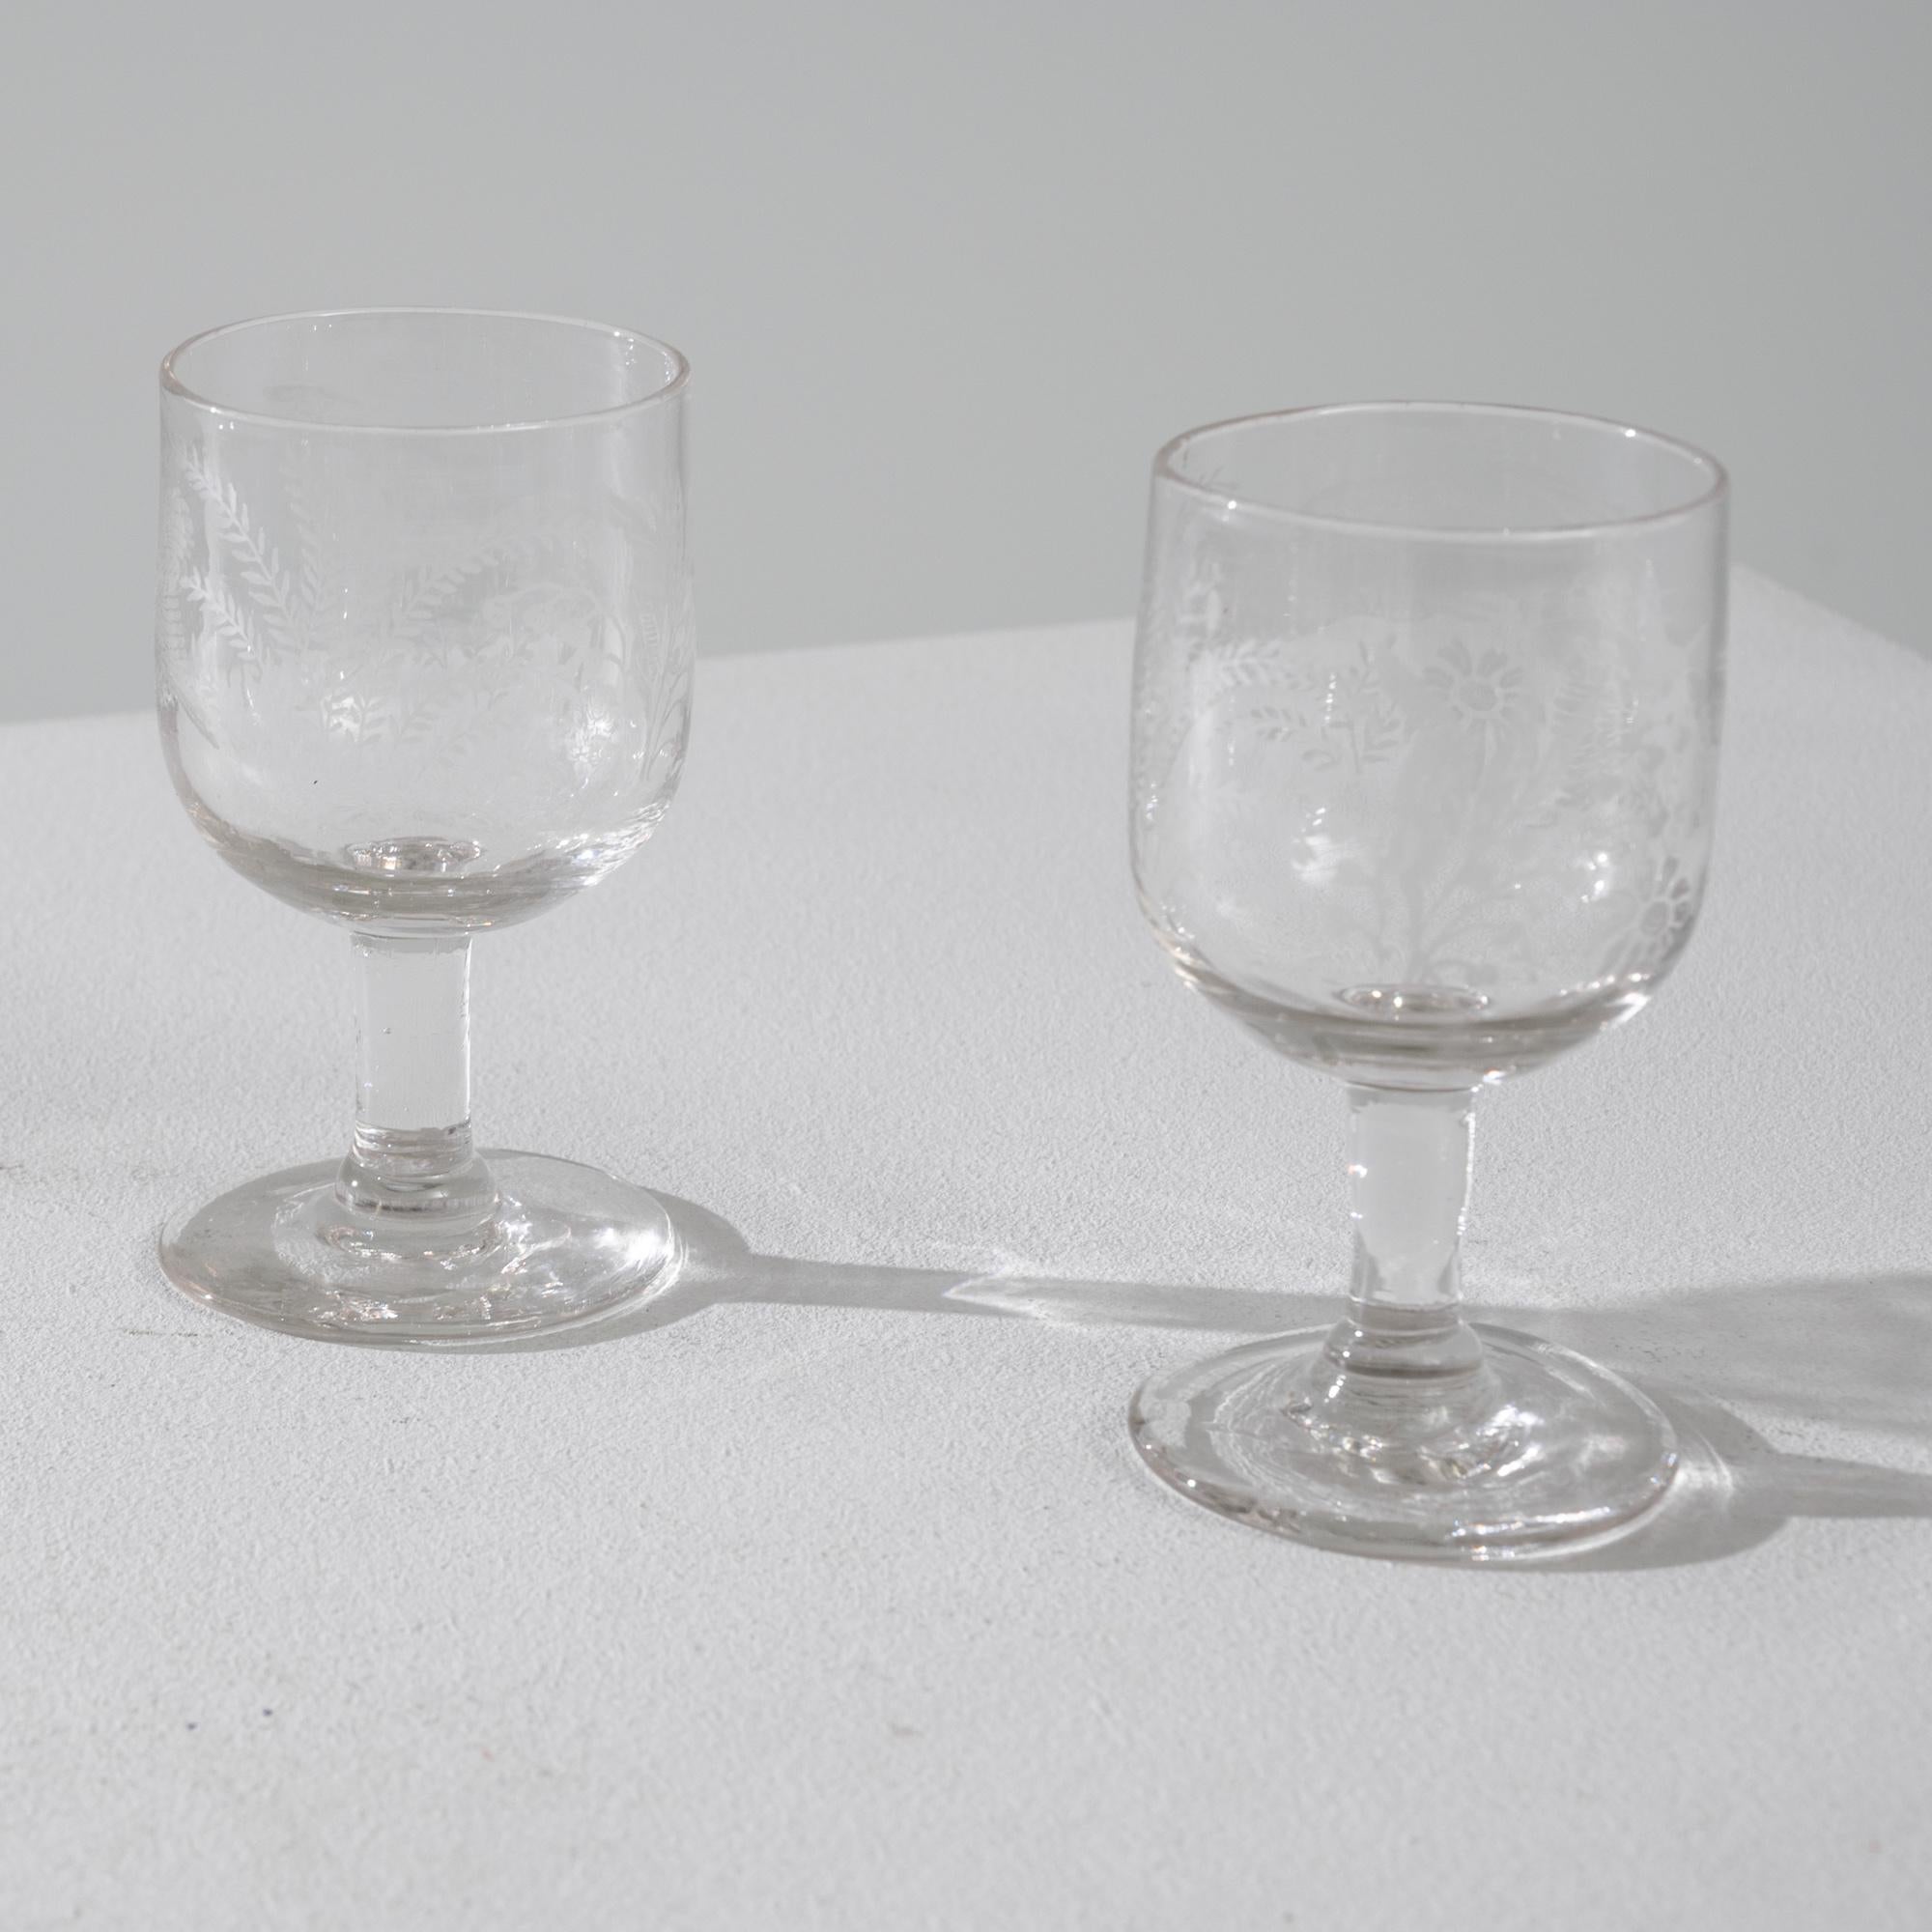 This set of early 19th century drinking glasses make an elegant addition to a table. The simple goblet shape, with its deep cup and wide base, serves equally well as a water or a wine glass — adaptable to any occasion. A delicate design of frosted